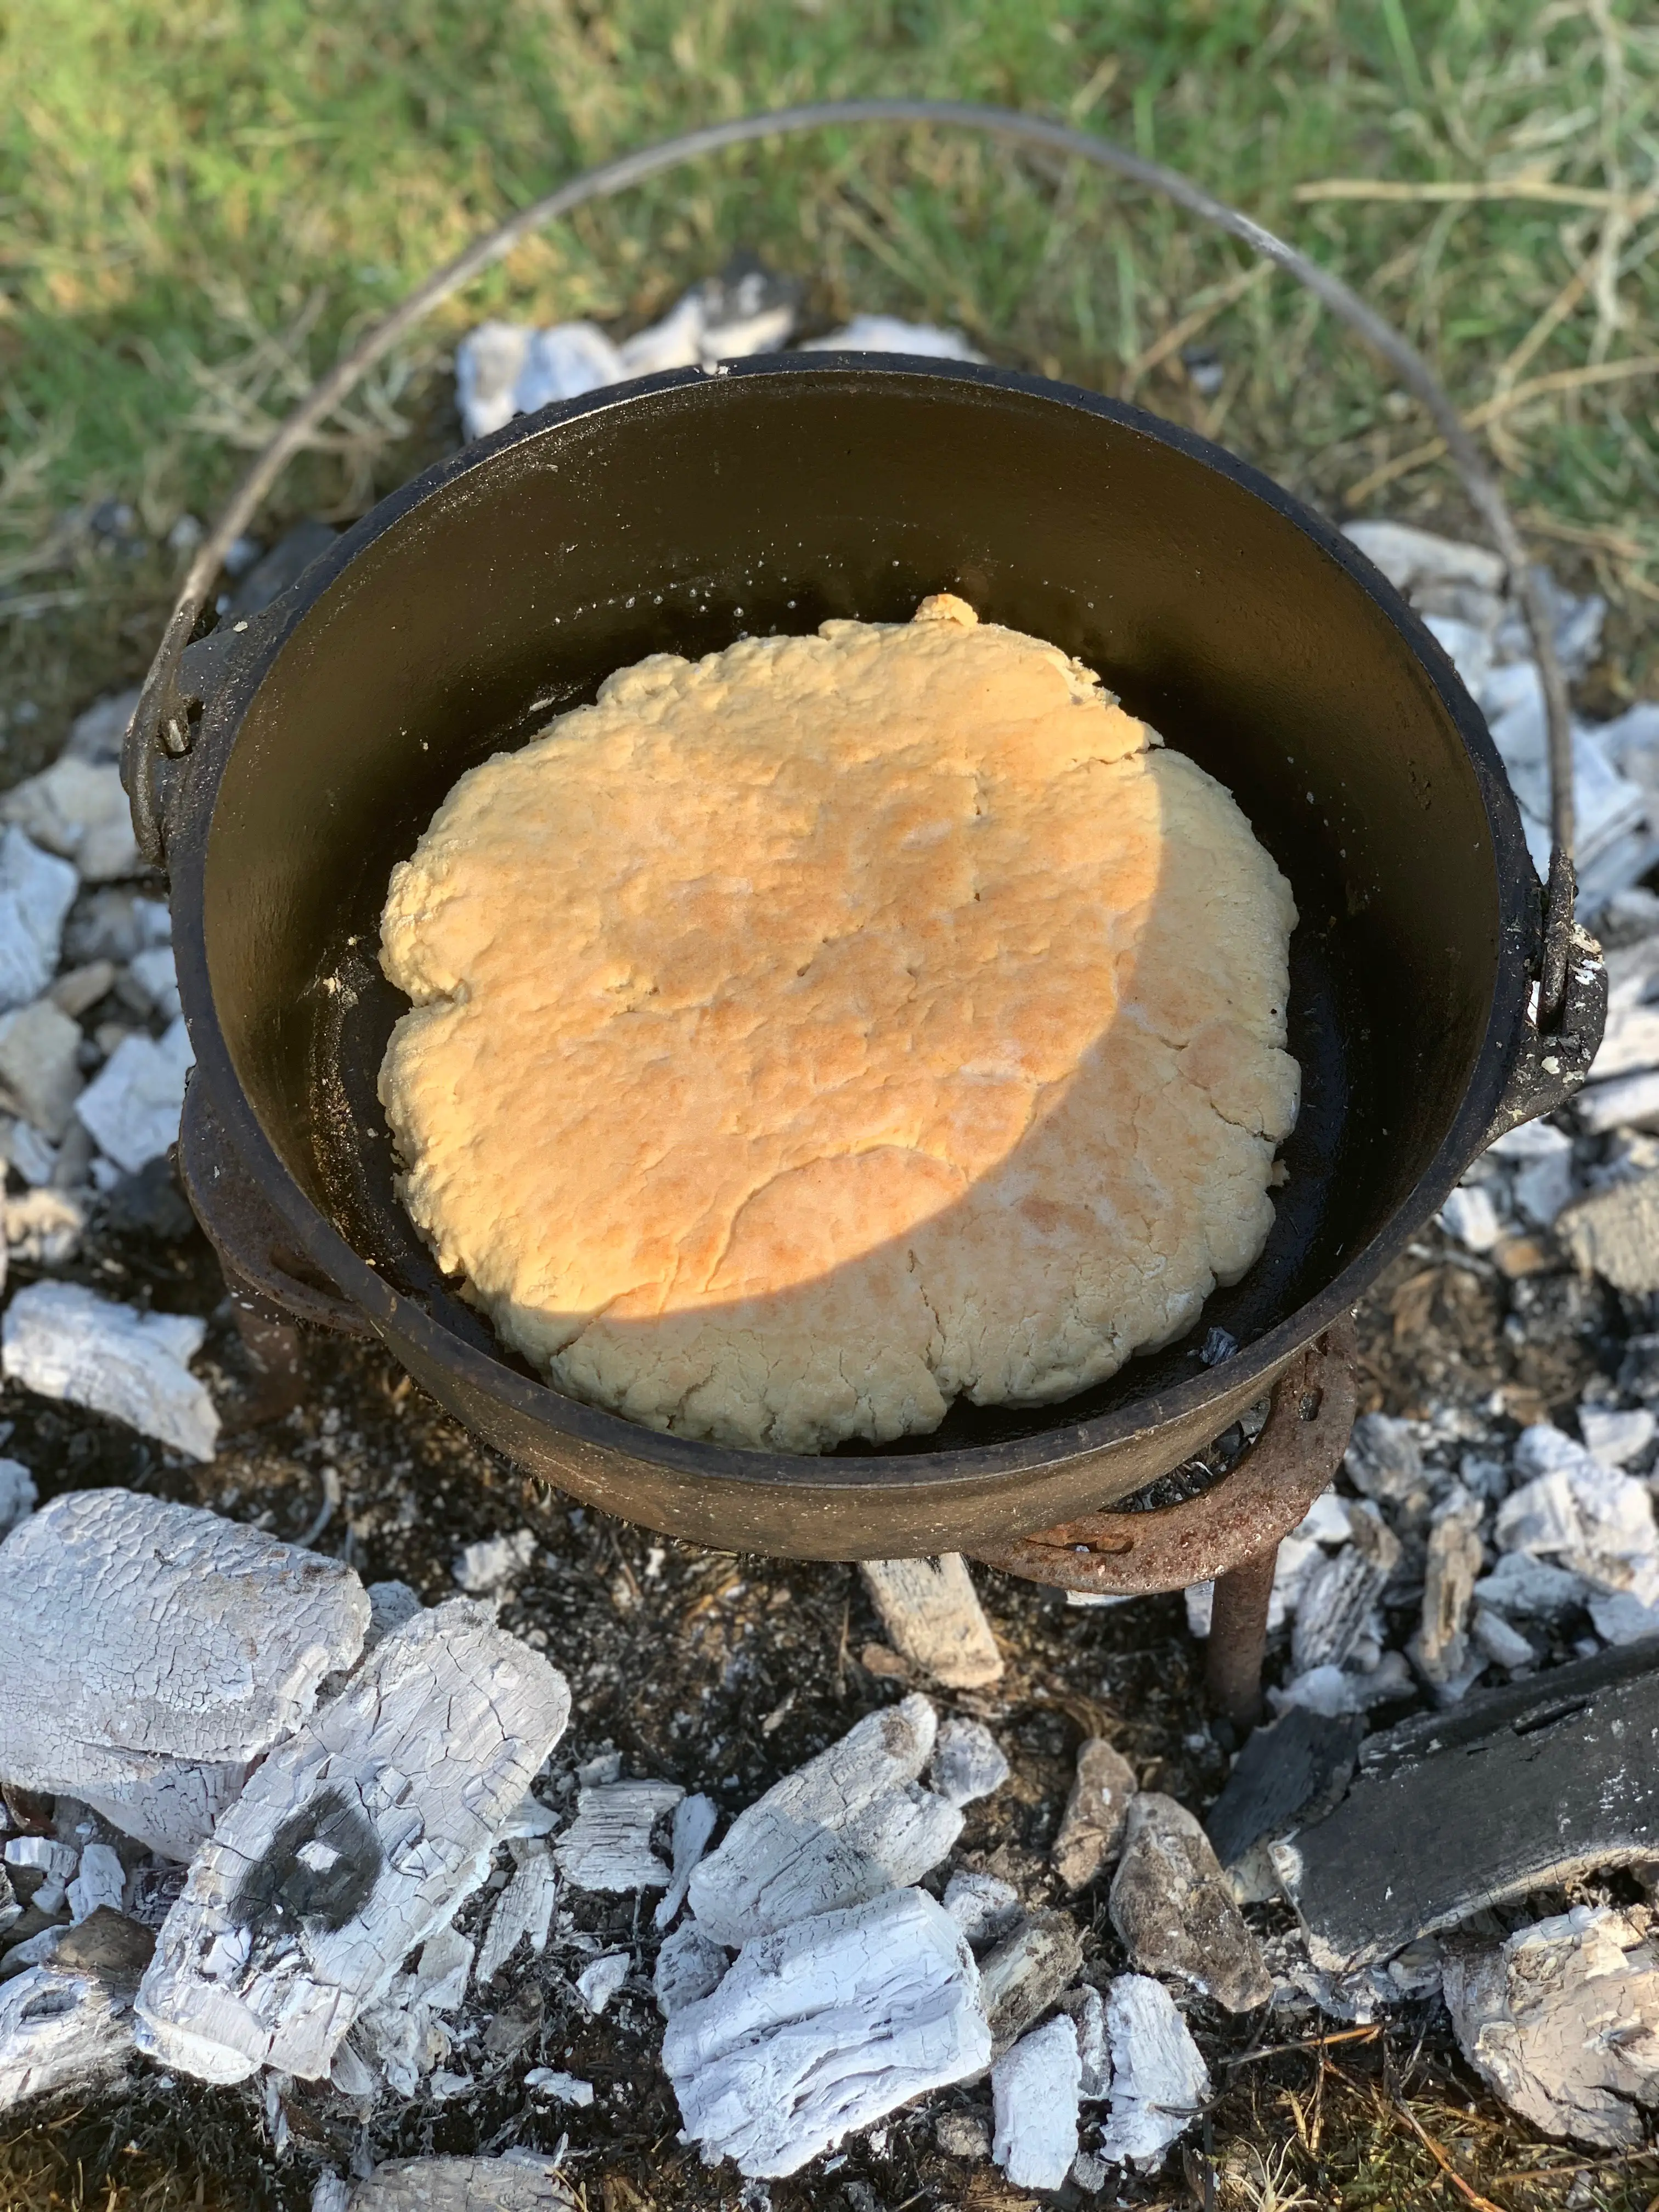 Texas Dutch Oven Bread is the easiest to make - Kitchen Wrangler